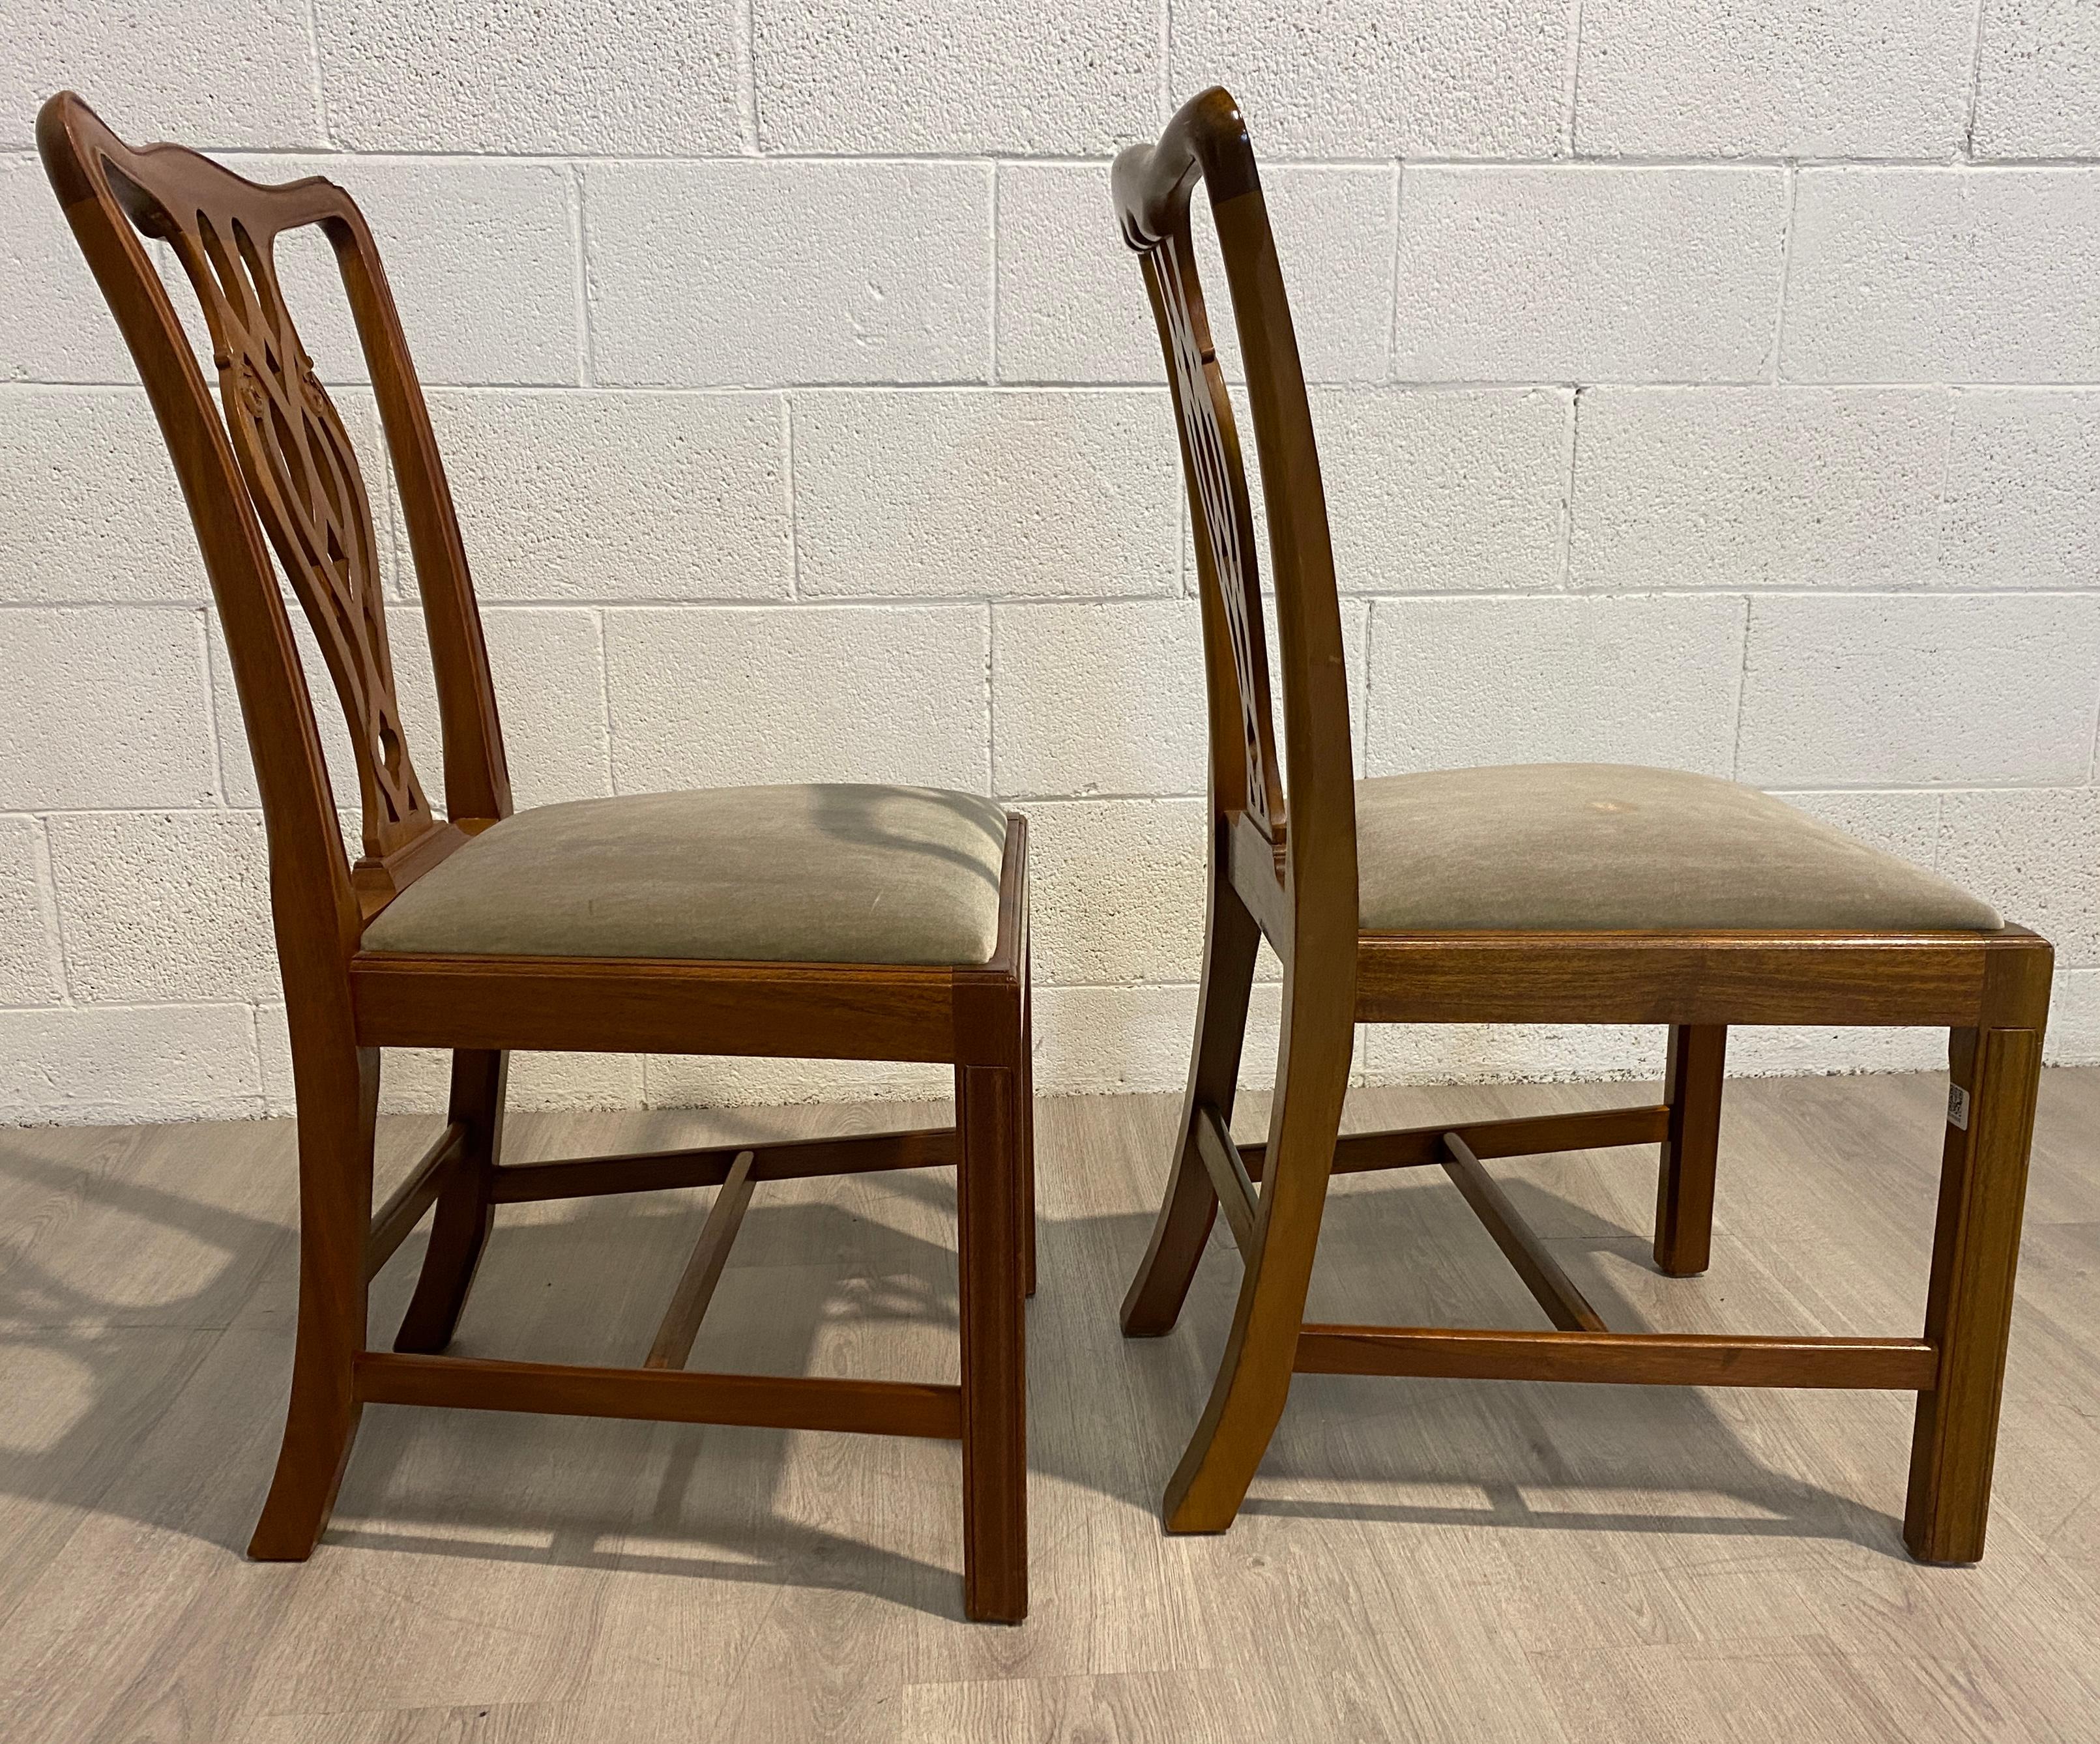 Hardwood Dining Chairs, Mahogany, Georgian Style, Made in England, Two Chairs without Arm For Sale